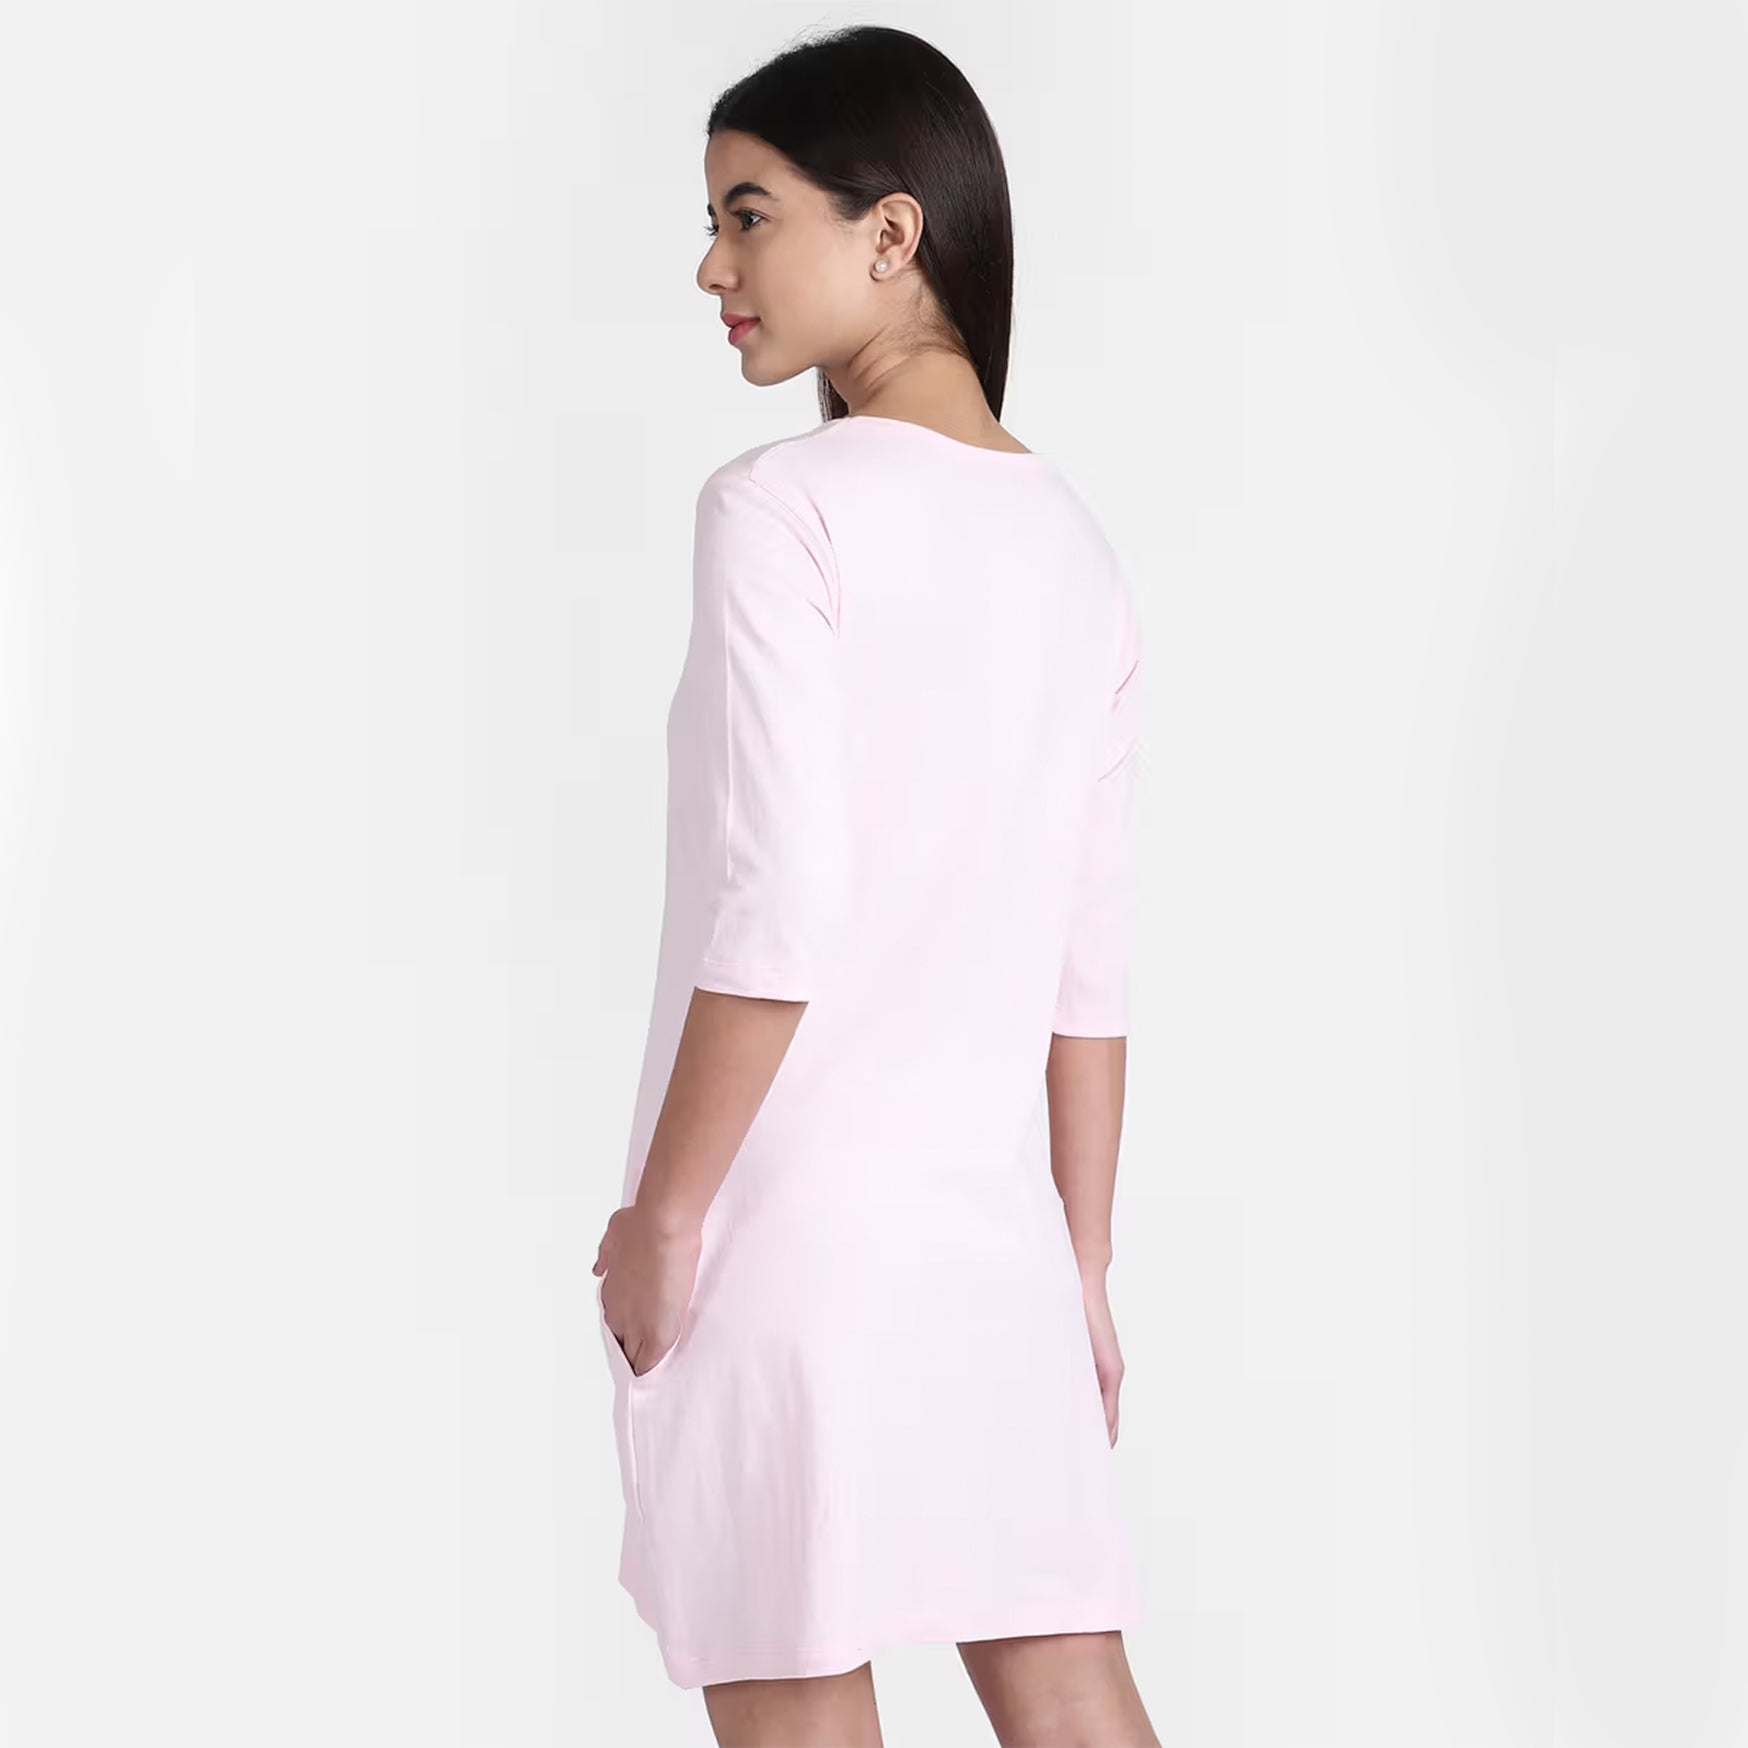 Free Authority Peanuts Featured Pink Dress For Women (M)